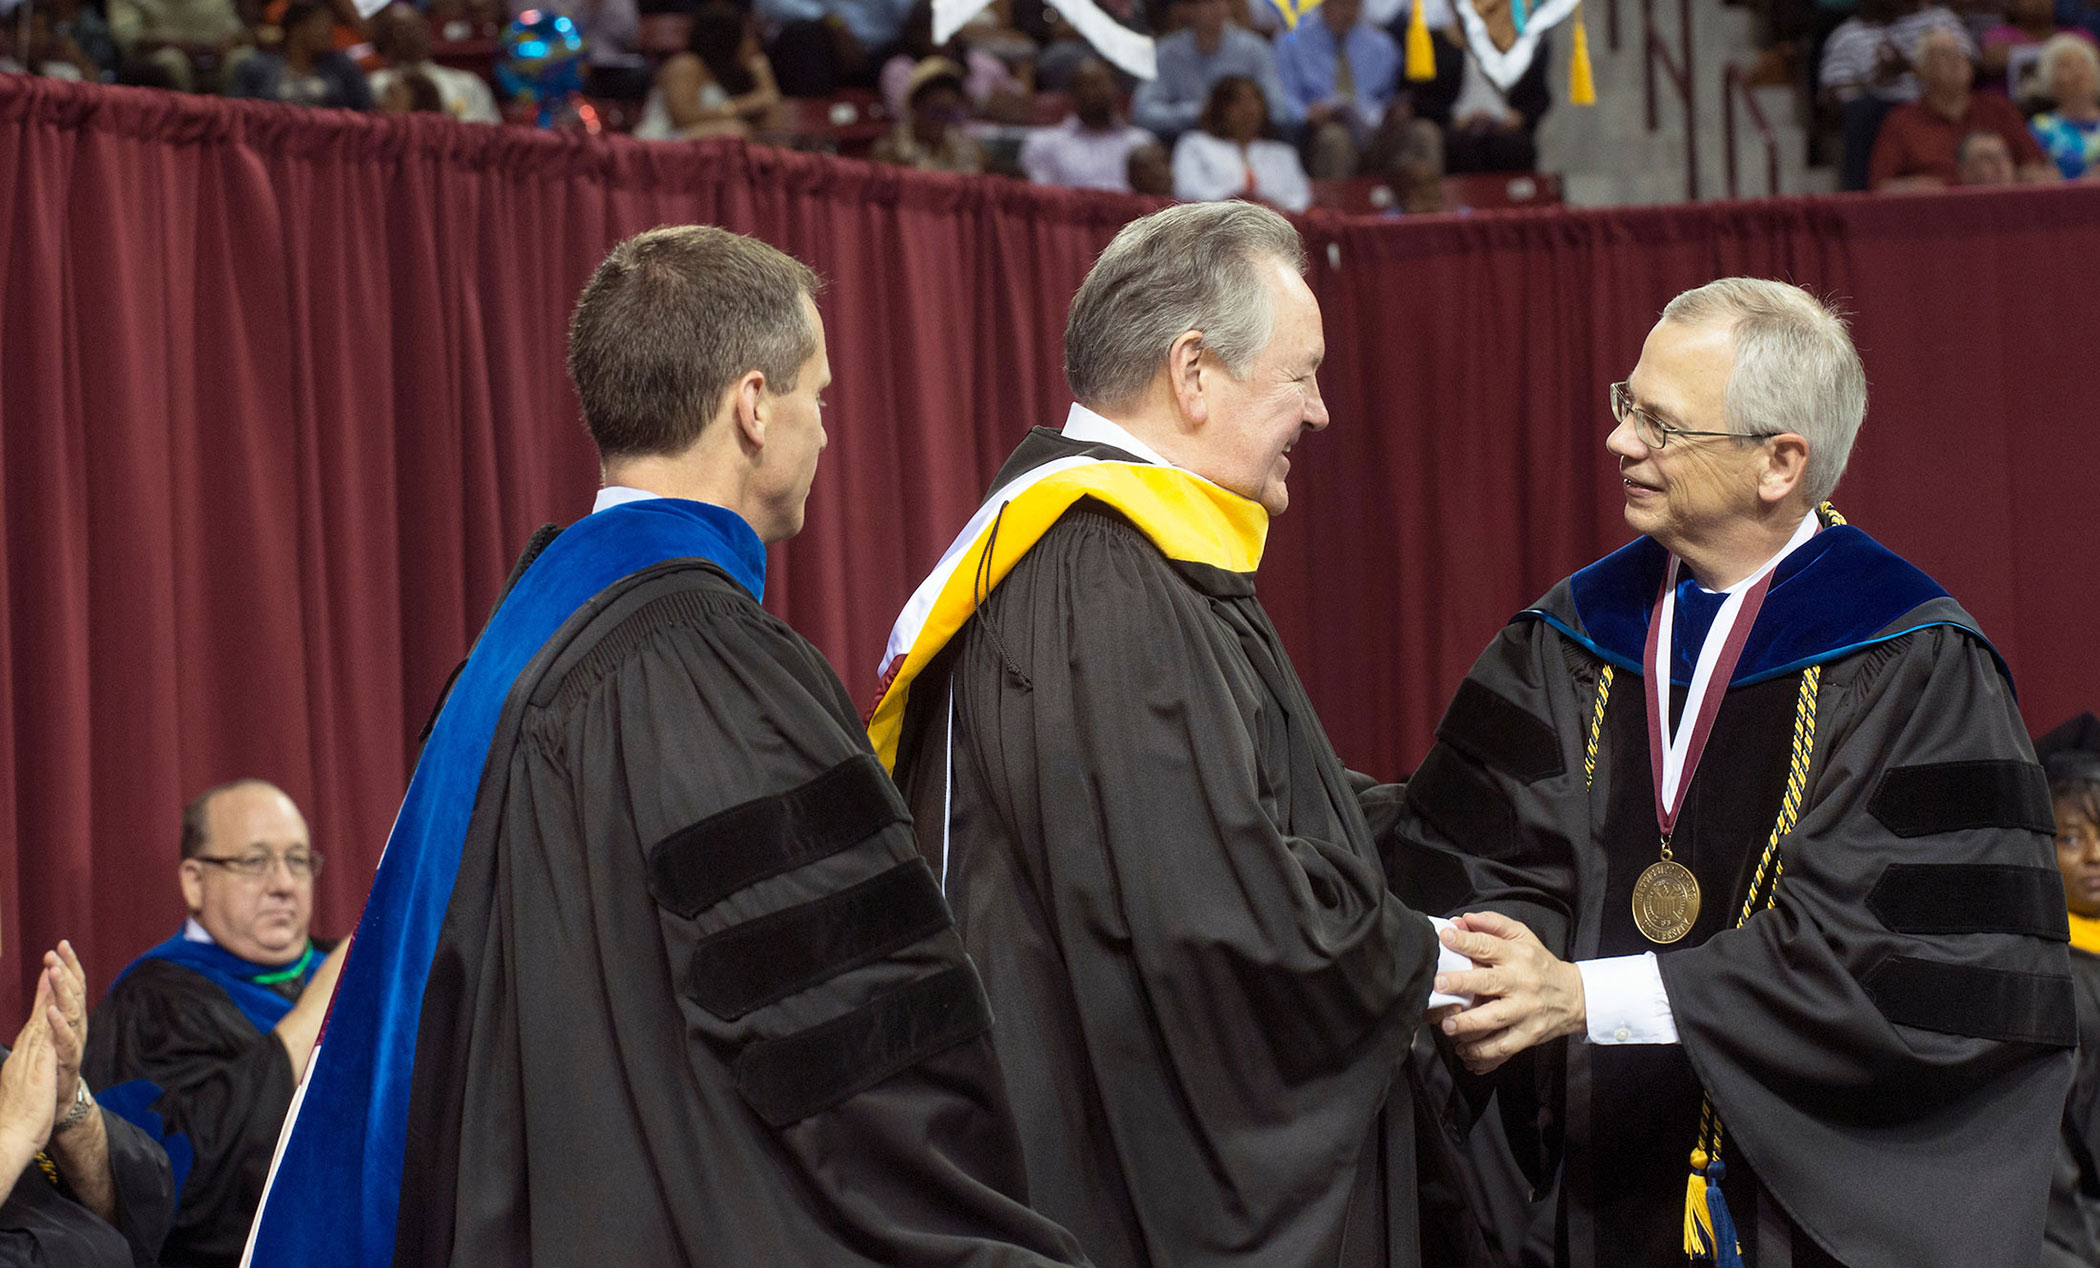 Bob Harrison, center, shakes hands with the provost, right, wearing graduation garb